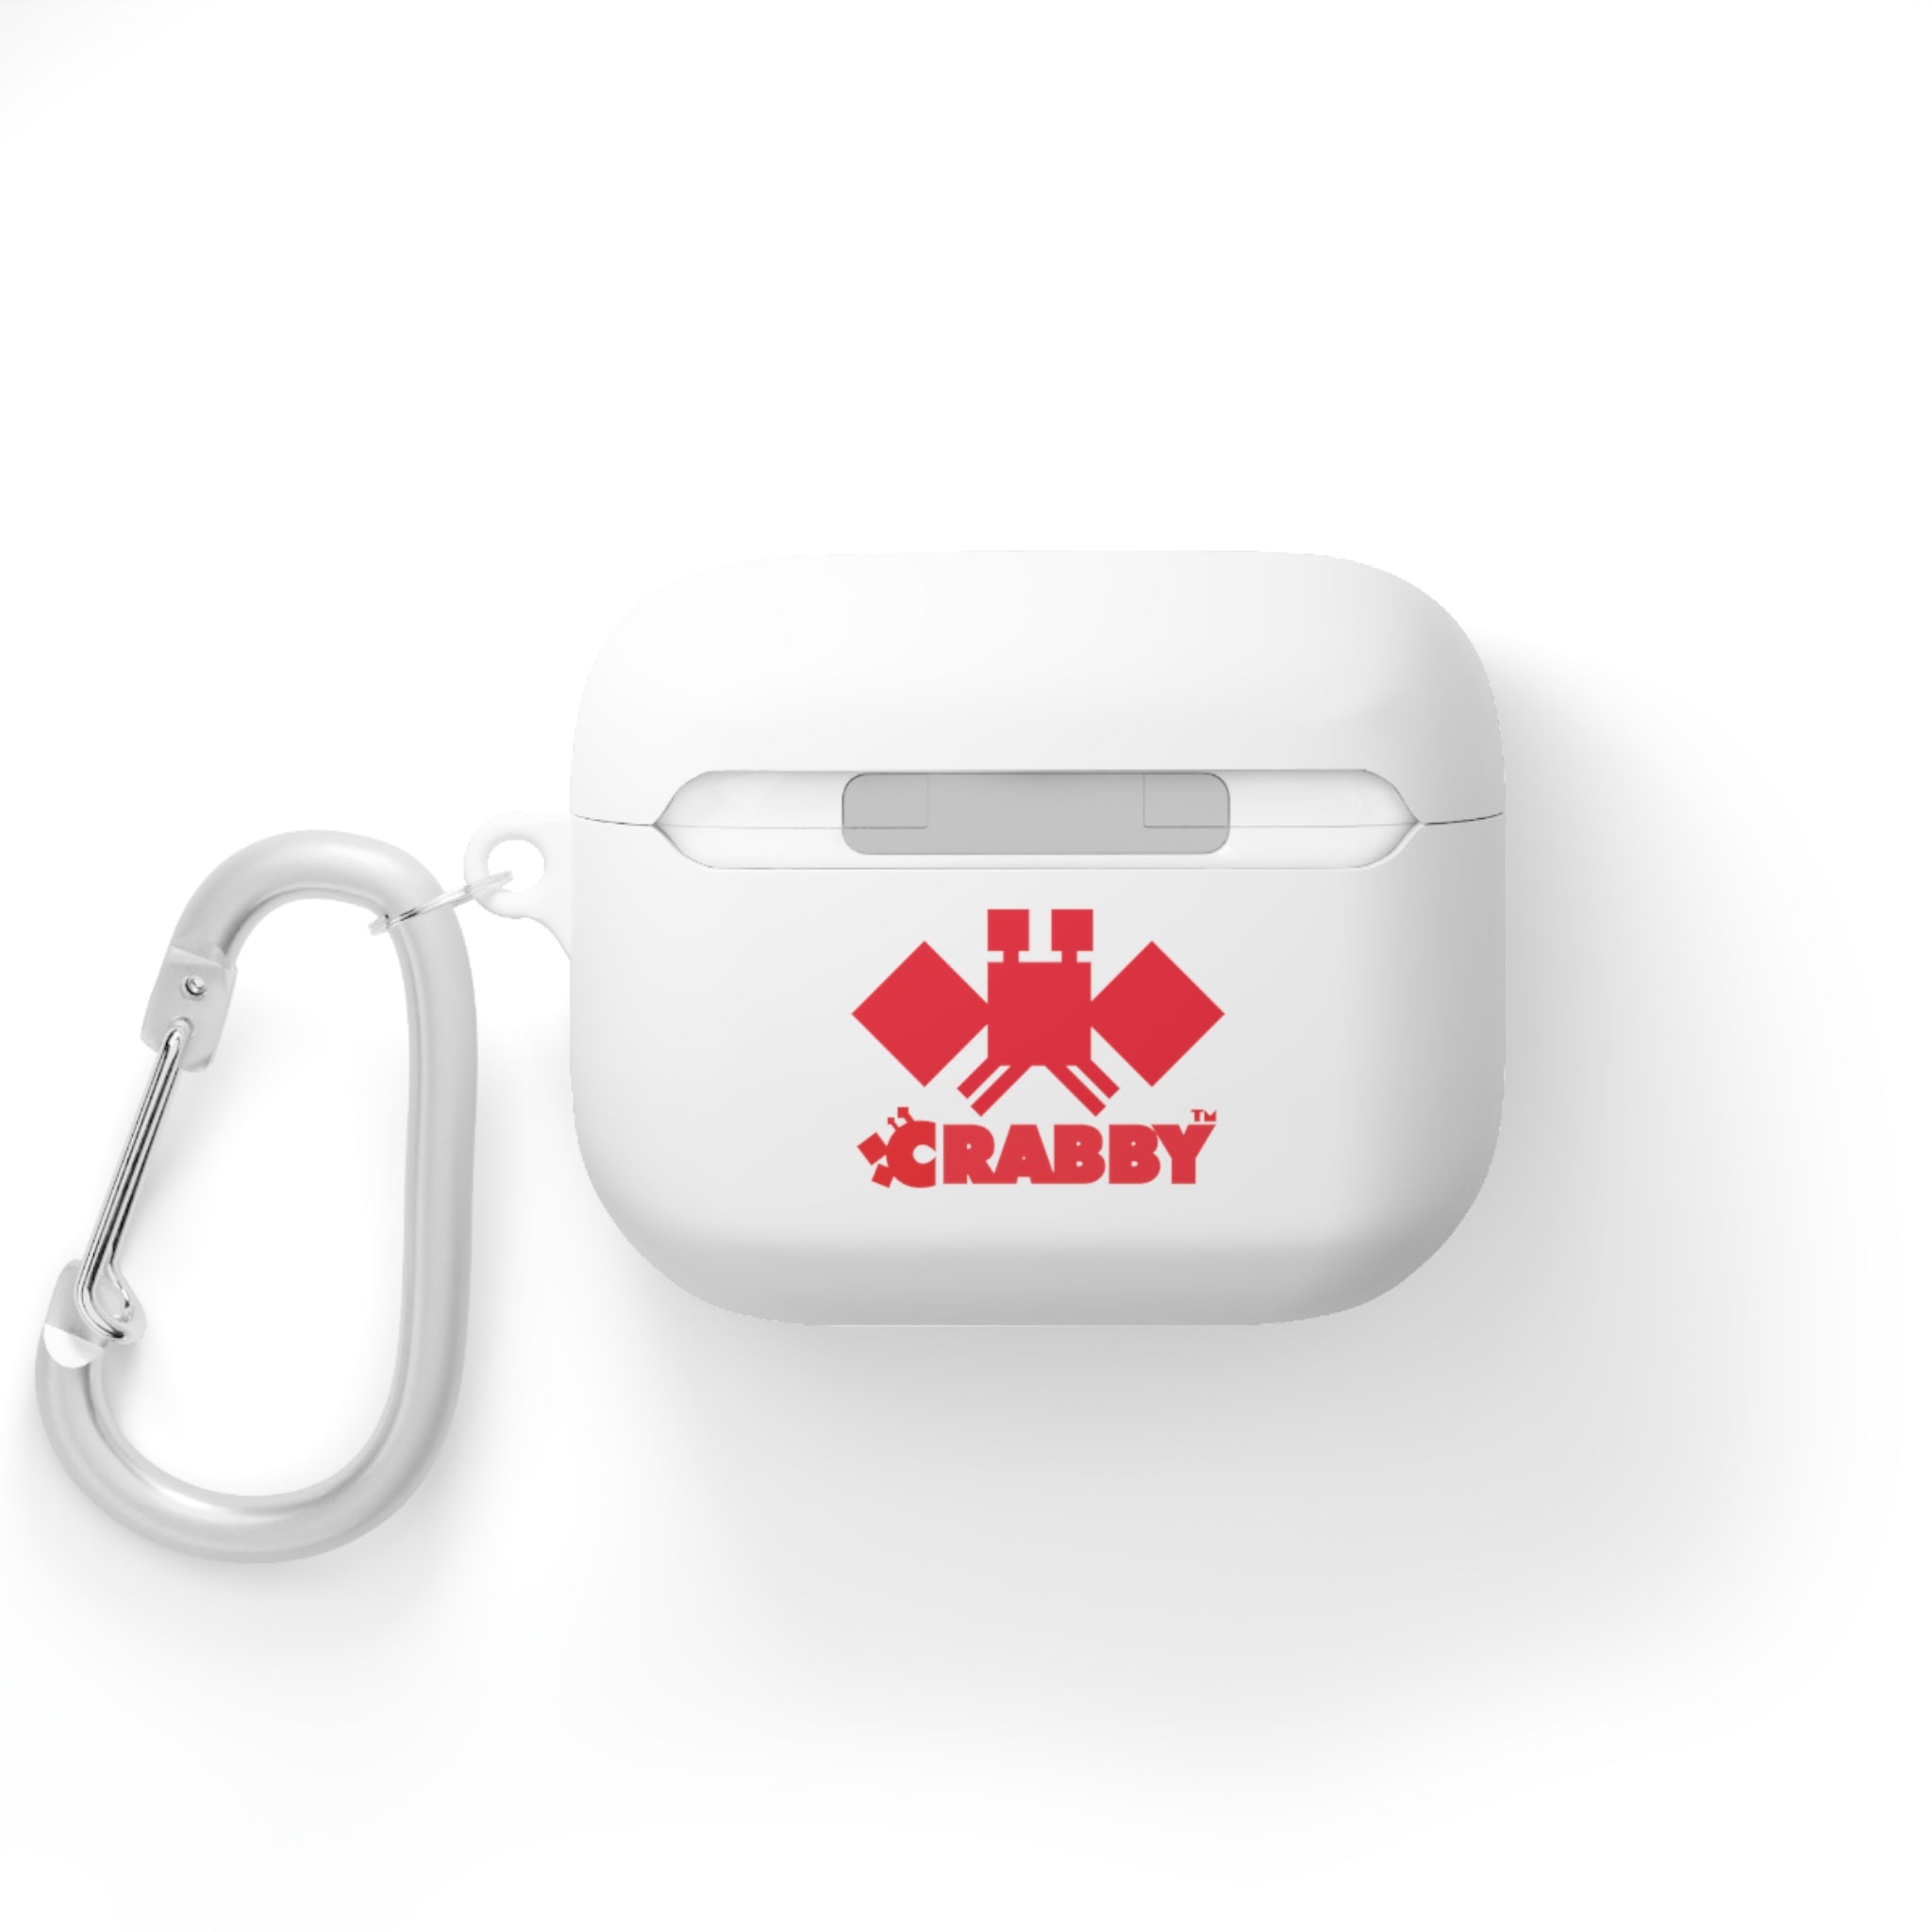 CRABBY AirPods Pro Case Cover